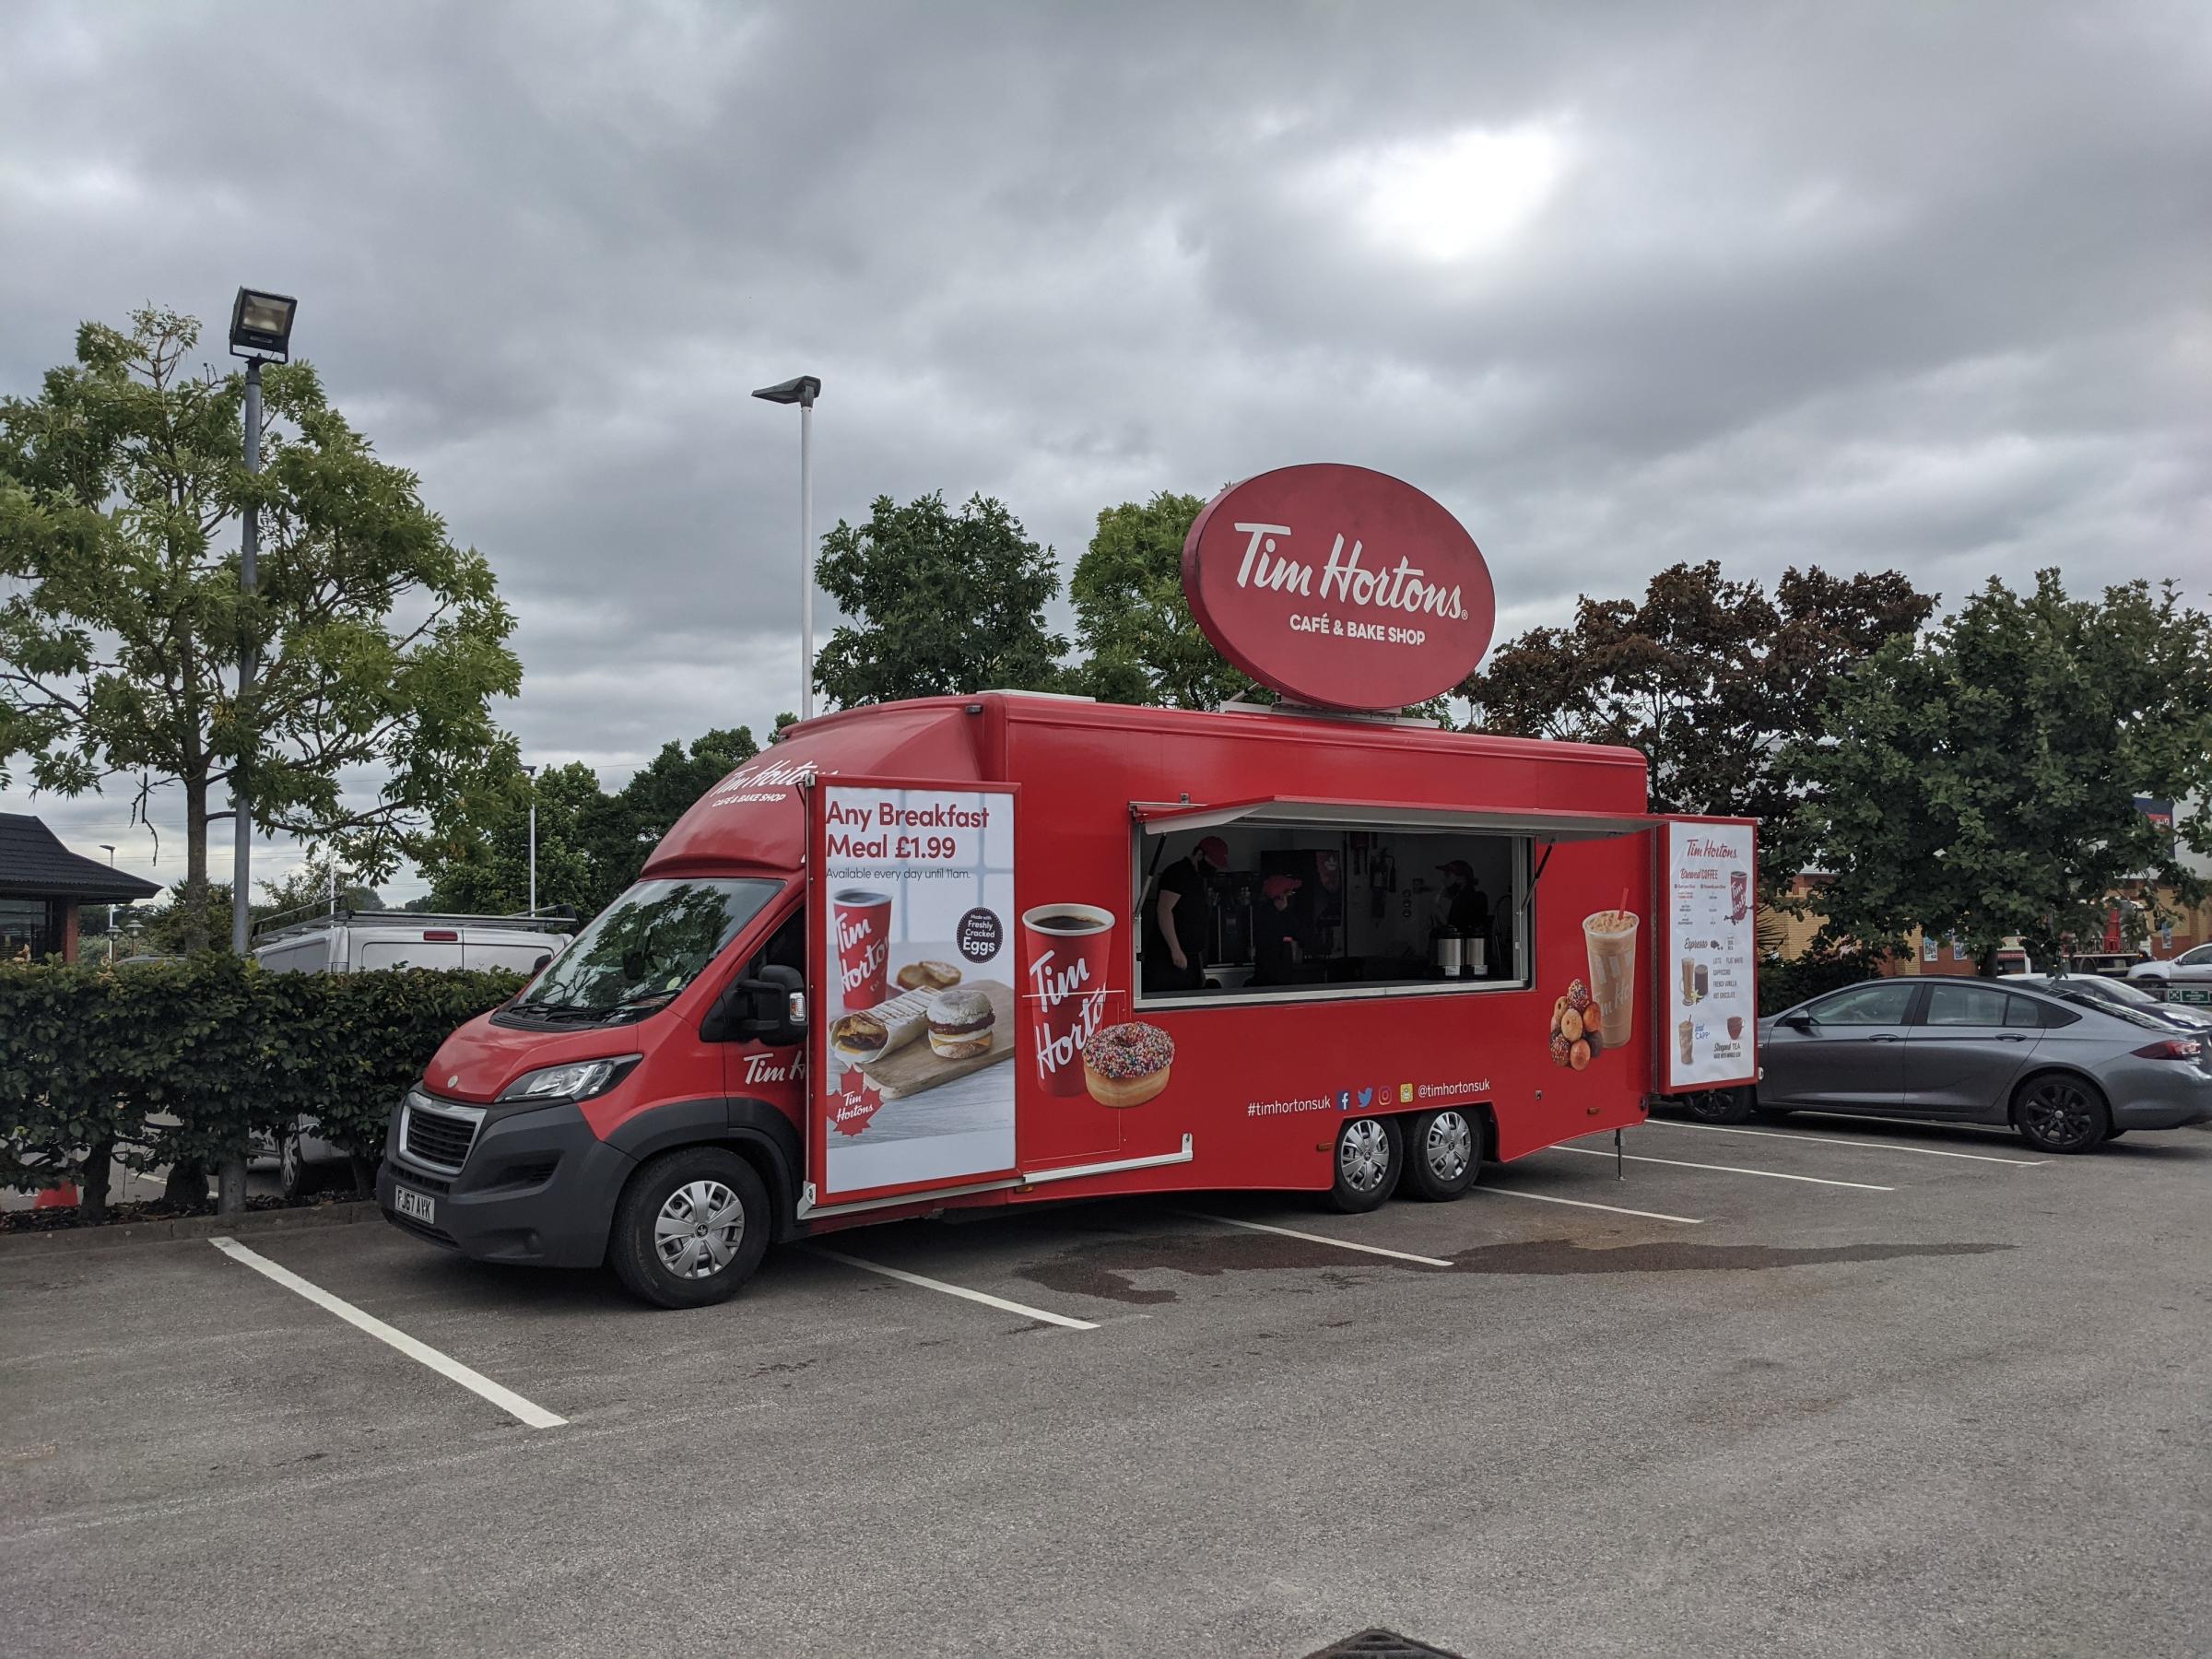 The new Tim Hortons restaurant at the Chester Retail Park opens on Saturday.